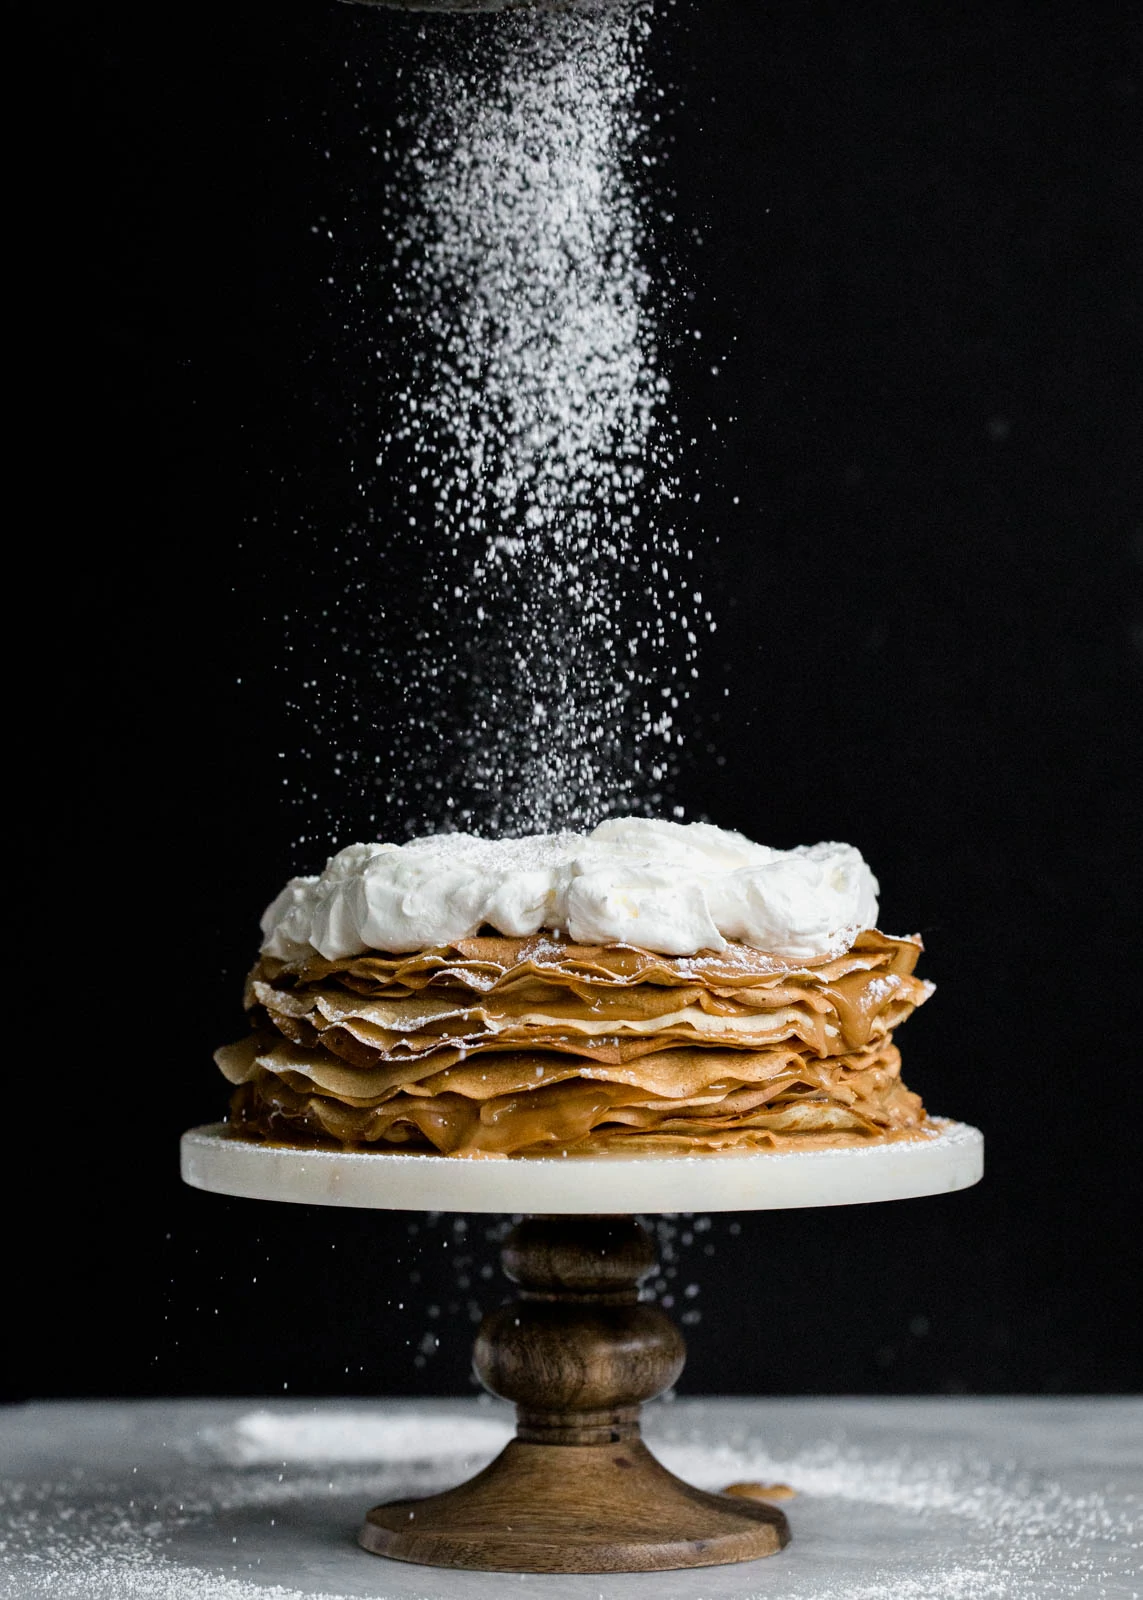 Layer after layer of banana crepes and dulce de leche, topped with whipped cream and bananas foster!